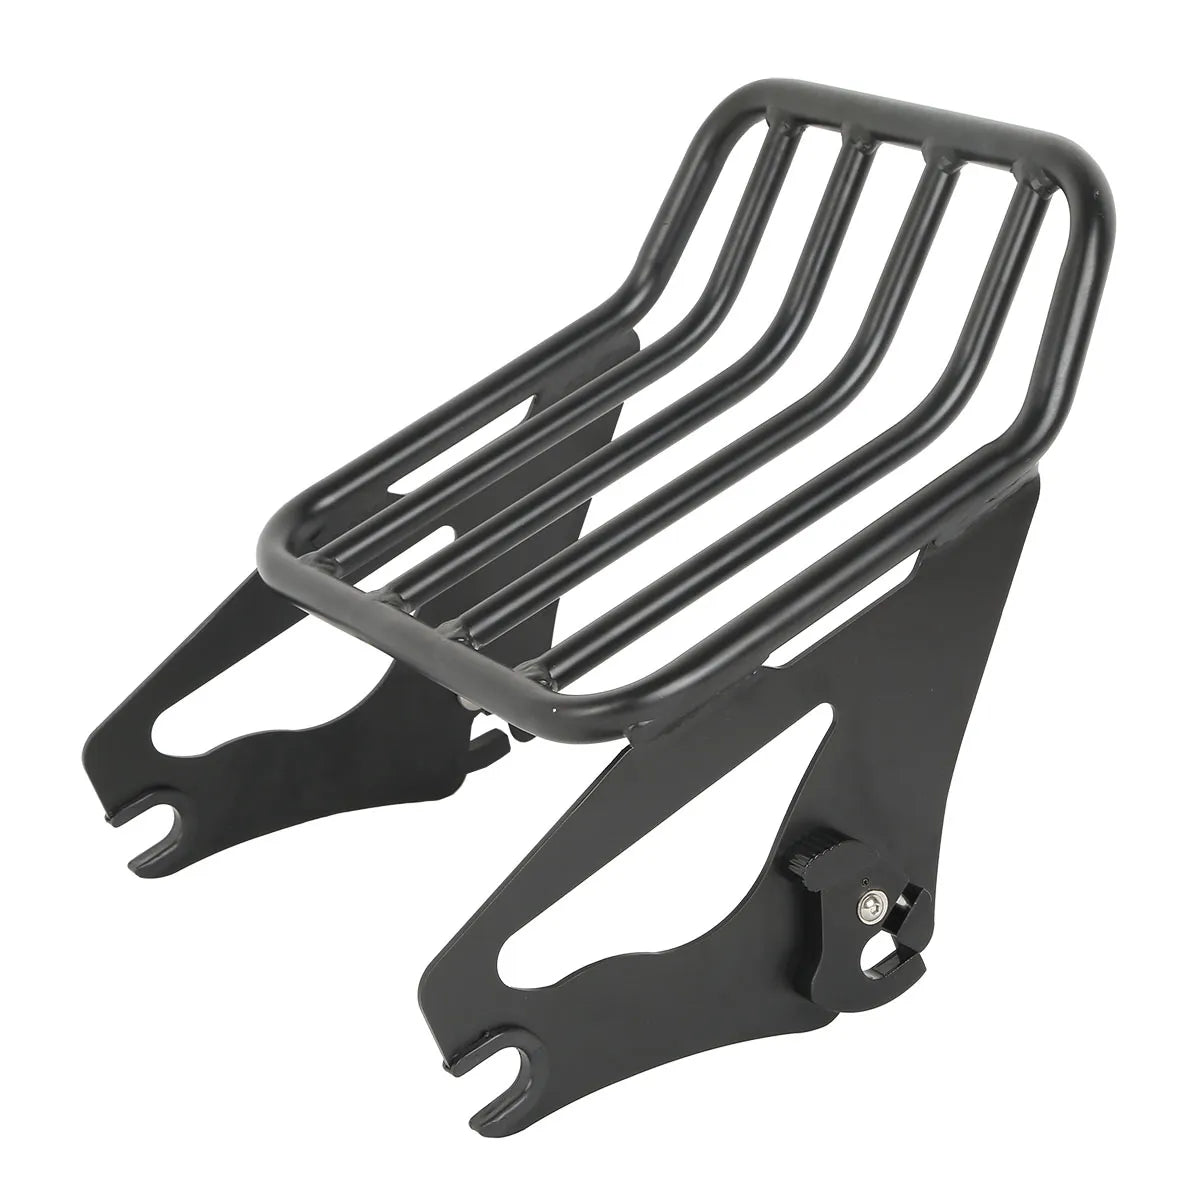 Voodoo Cycle House Custom Detachable Two-Up Luggage Rack For Harley-Davidson Touring Models Road King Street Electra Glide Ultra Limited 2009-UP